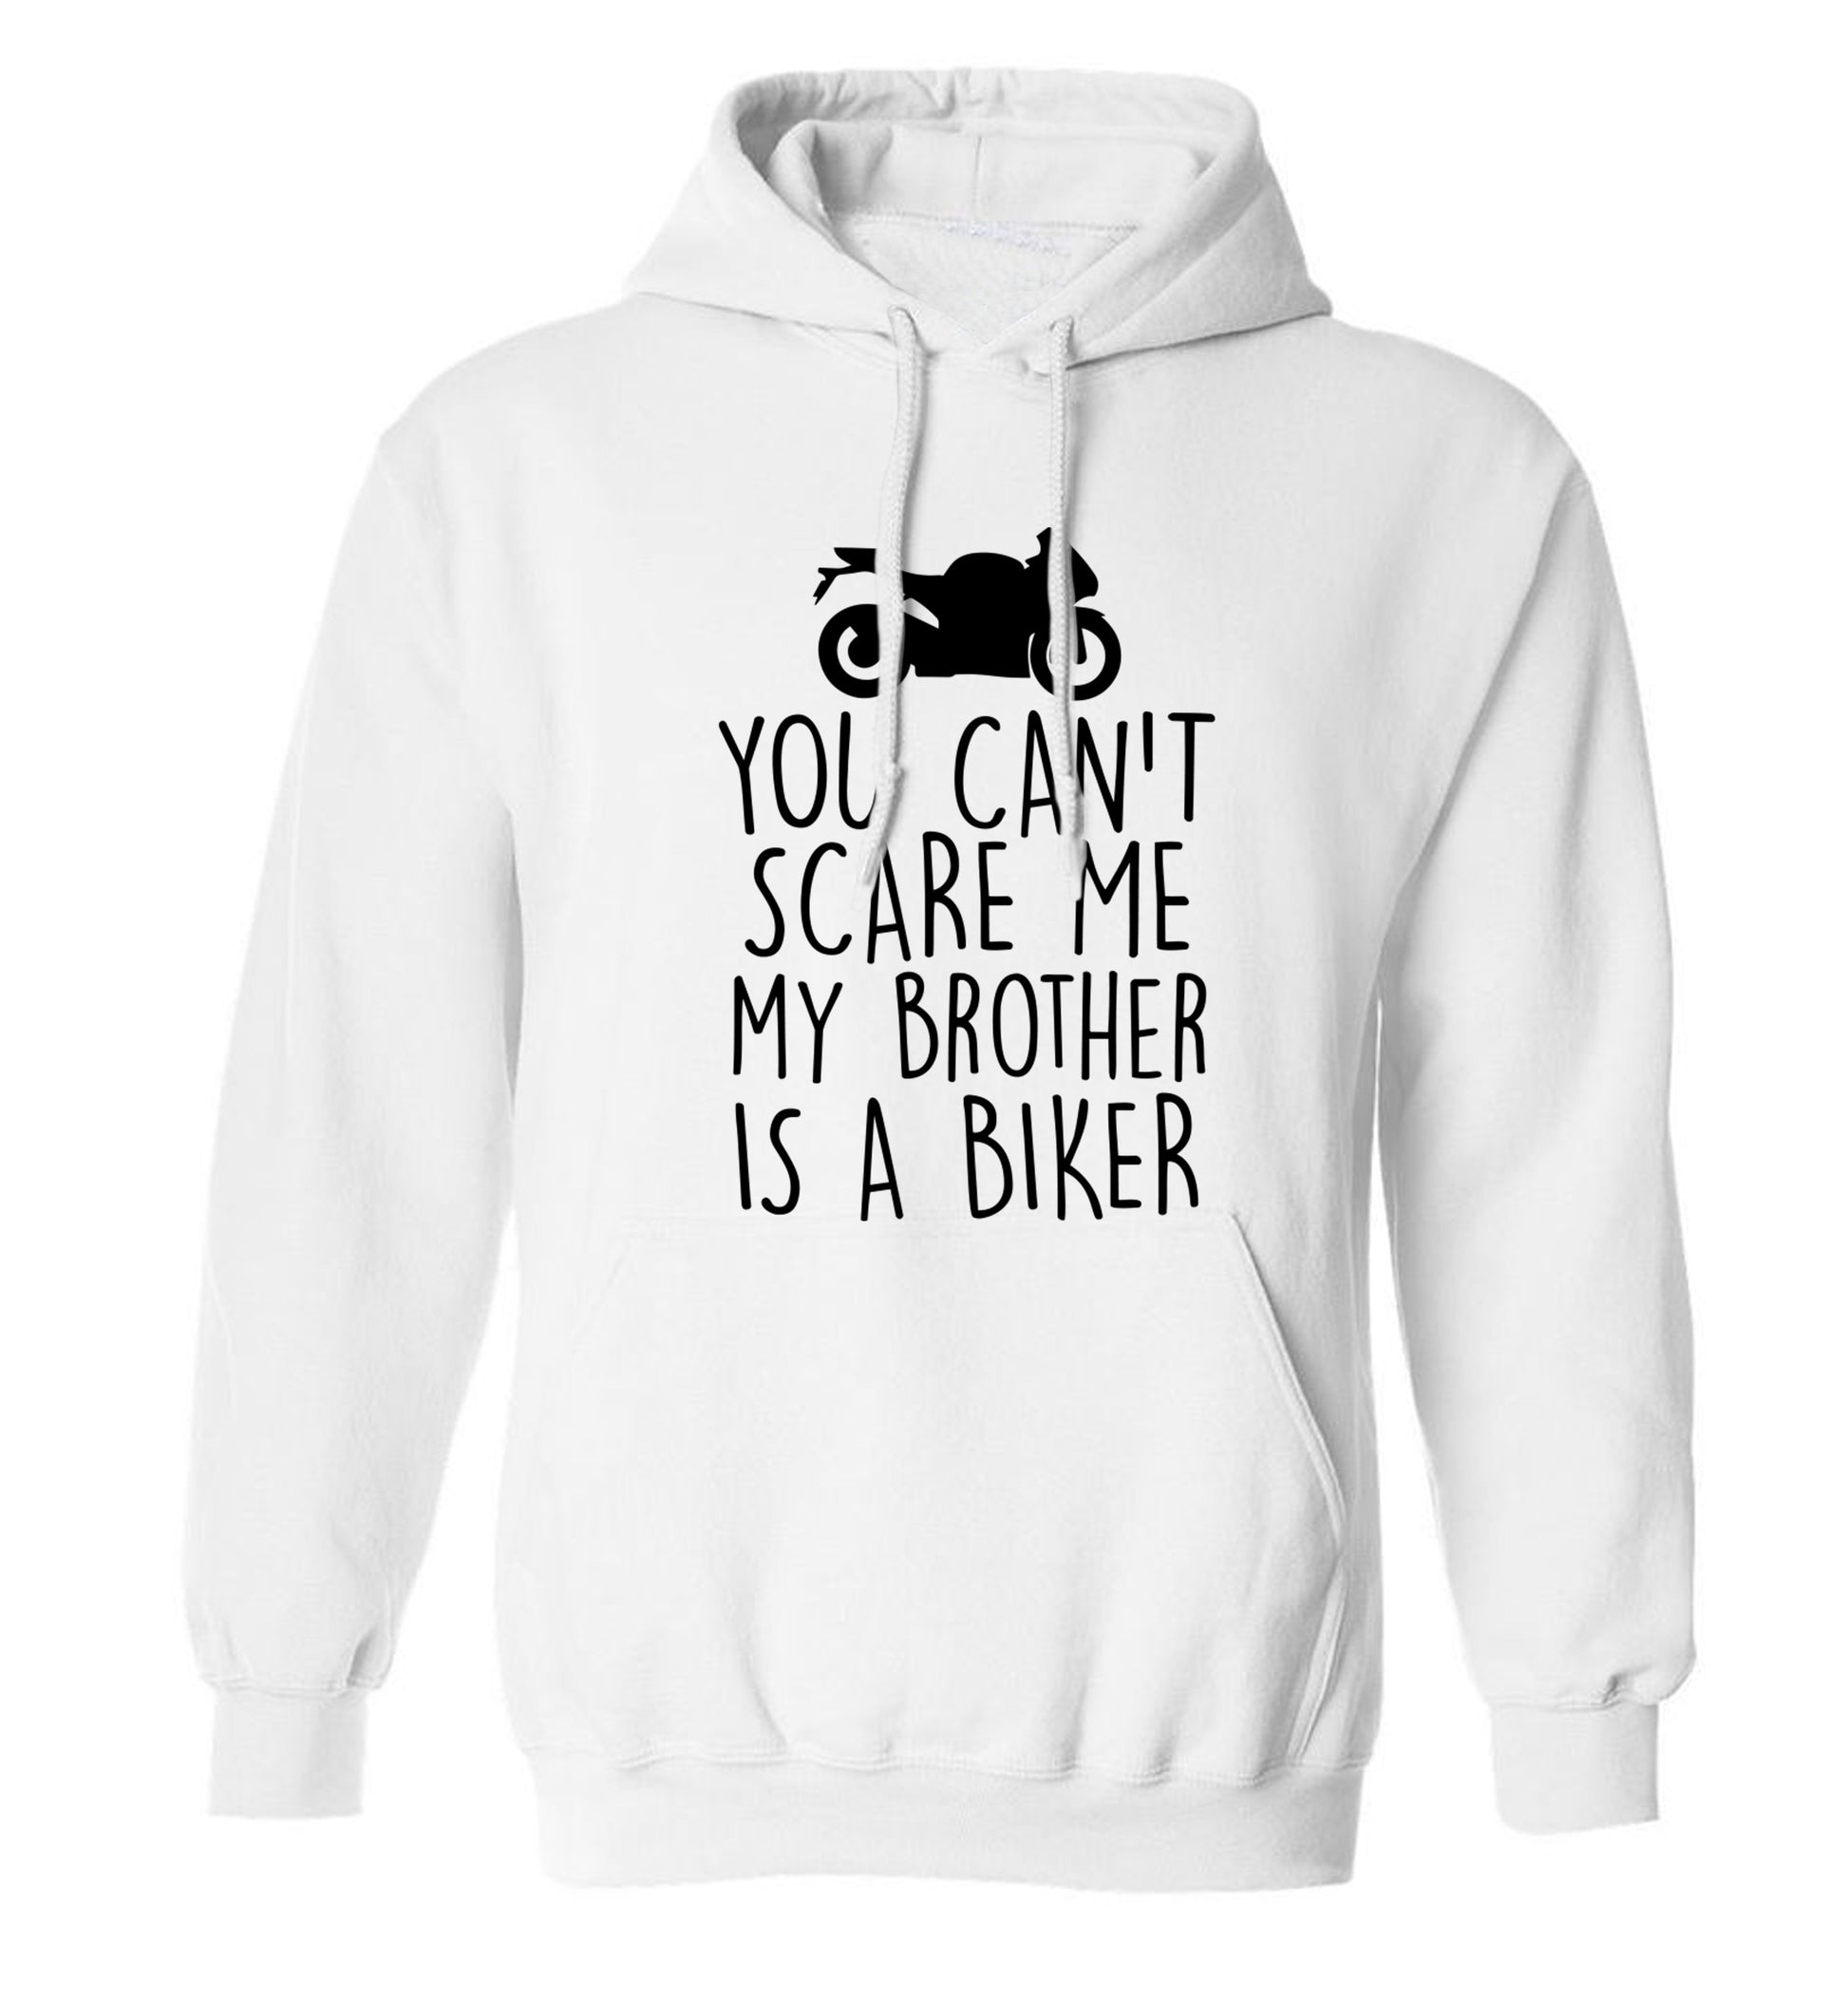 You can't scare me my brother is a biker adults unisex white hoodie 2XL